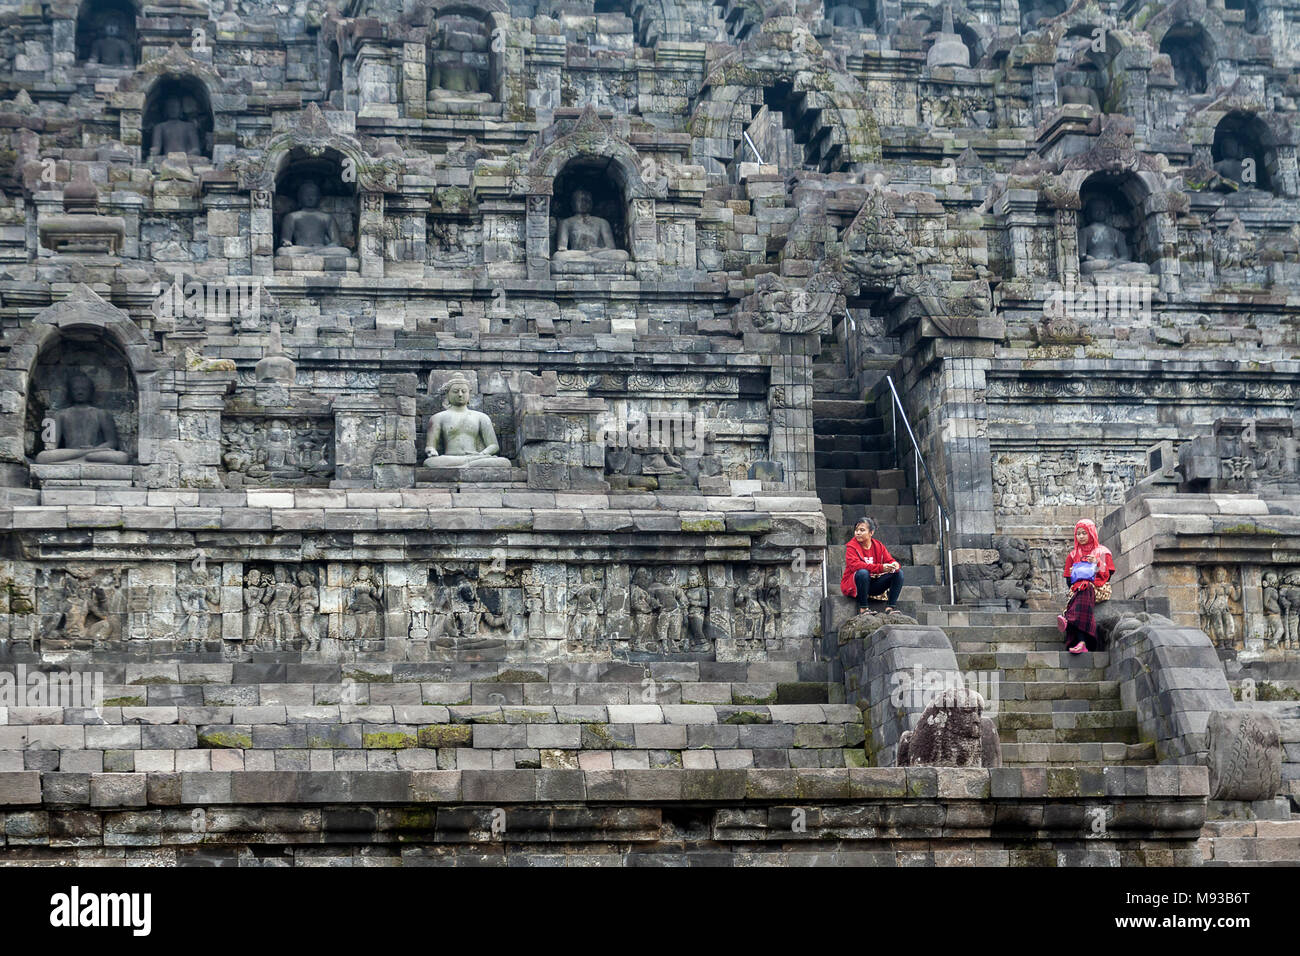 Sense of Scale with two young girls waiting amongst Buddha statues at the World Famous tourist attraction and Unesco site of Borobudur Buddhist temple Stock Photo